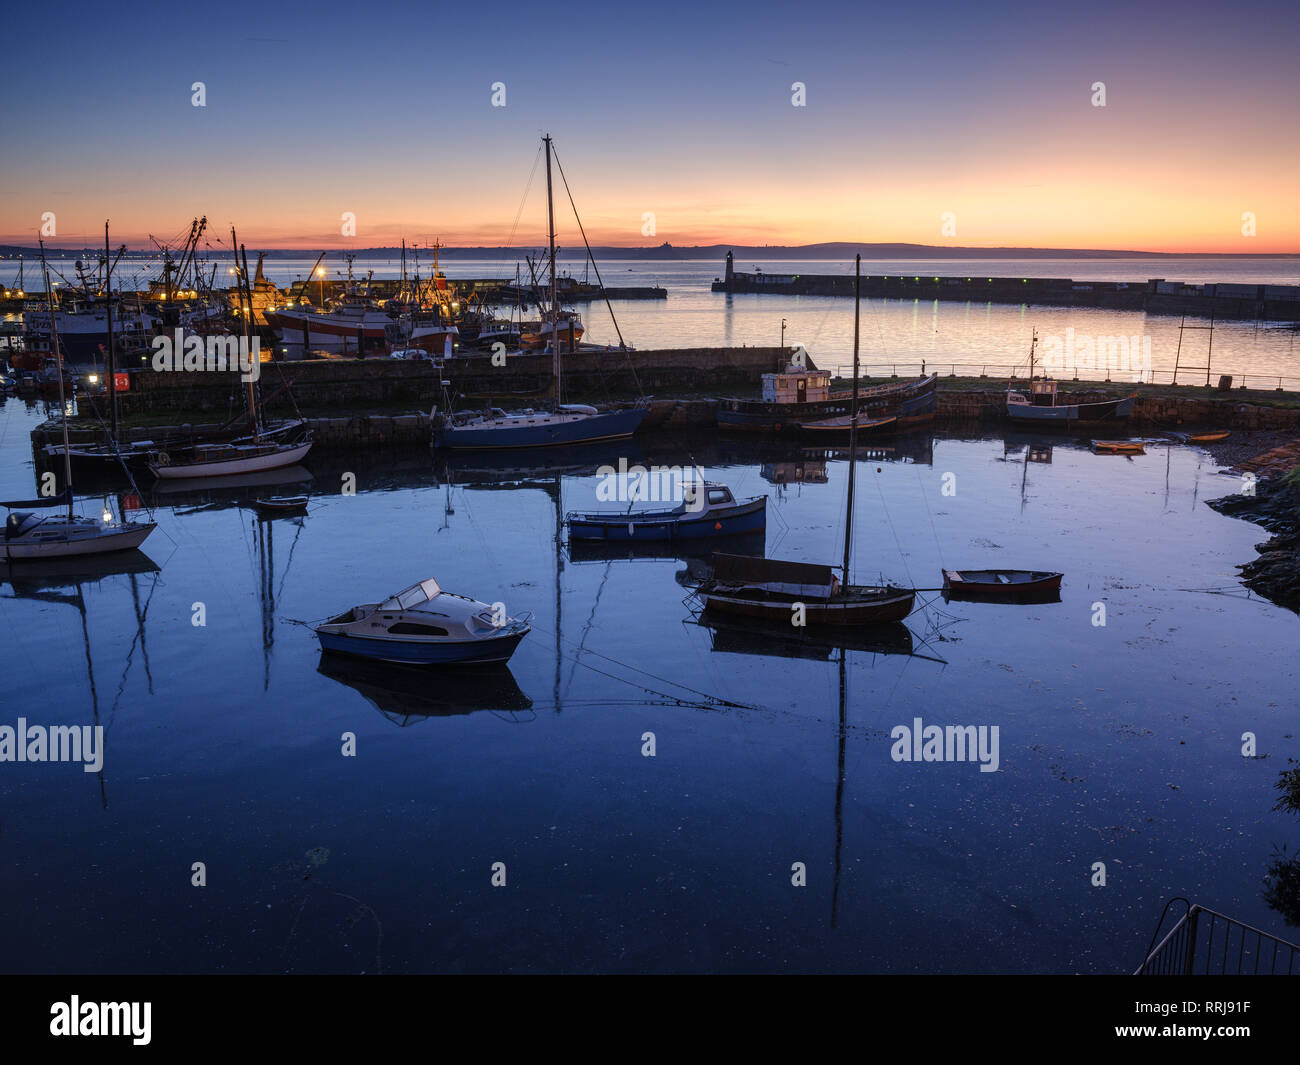 Sunrise looking across the inner and outer harbours at the fishing port of Newlyn, Cornwall, England, United Kingdom, Europe Stock Photo